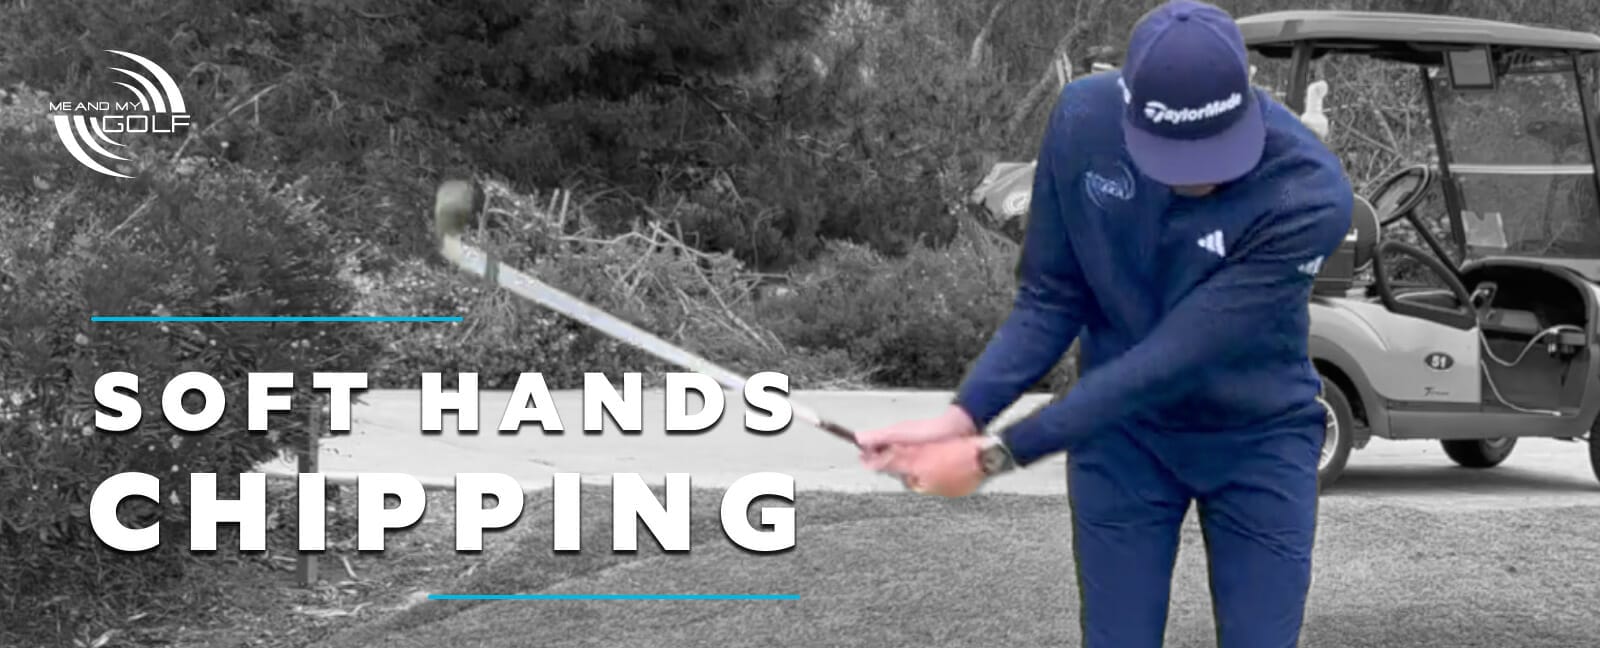 Soft Hands Chipping - Practice Plan